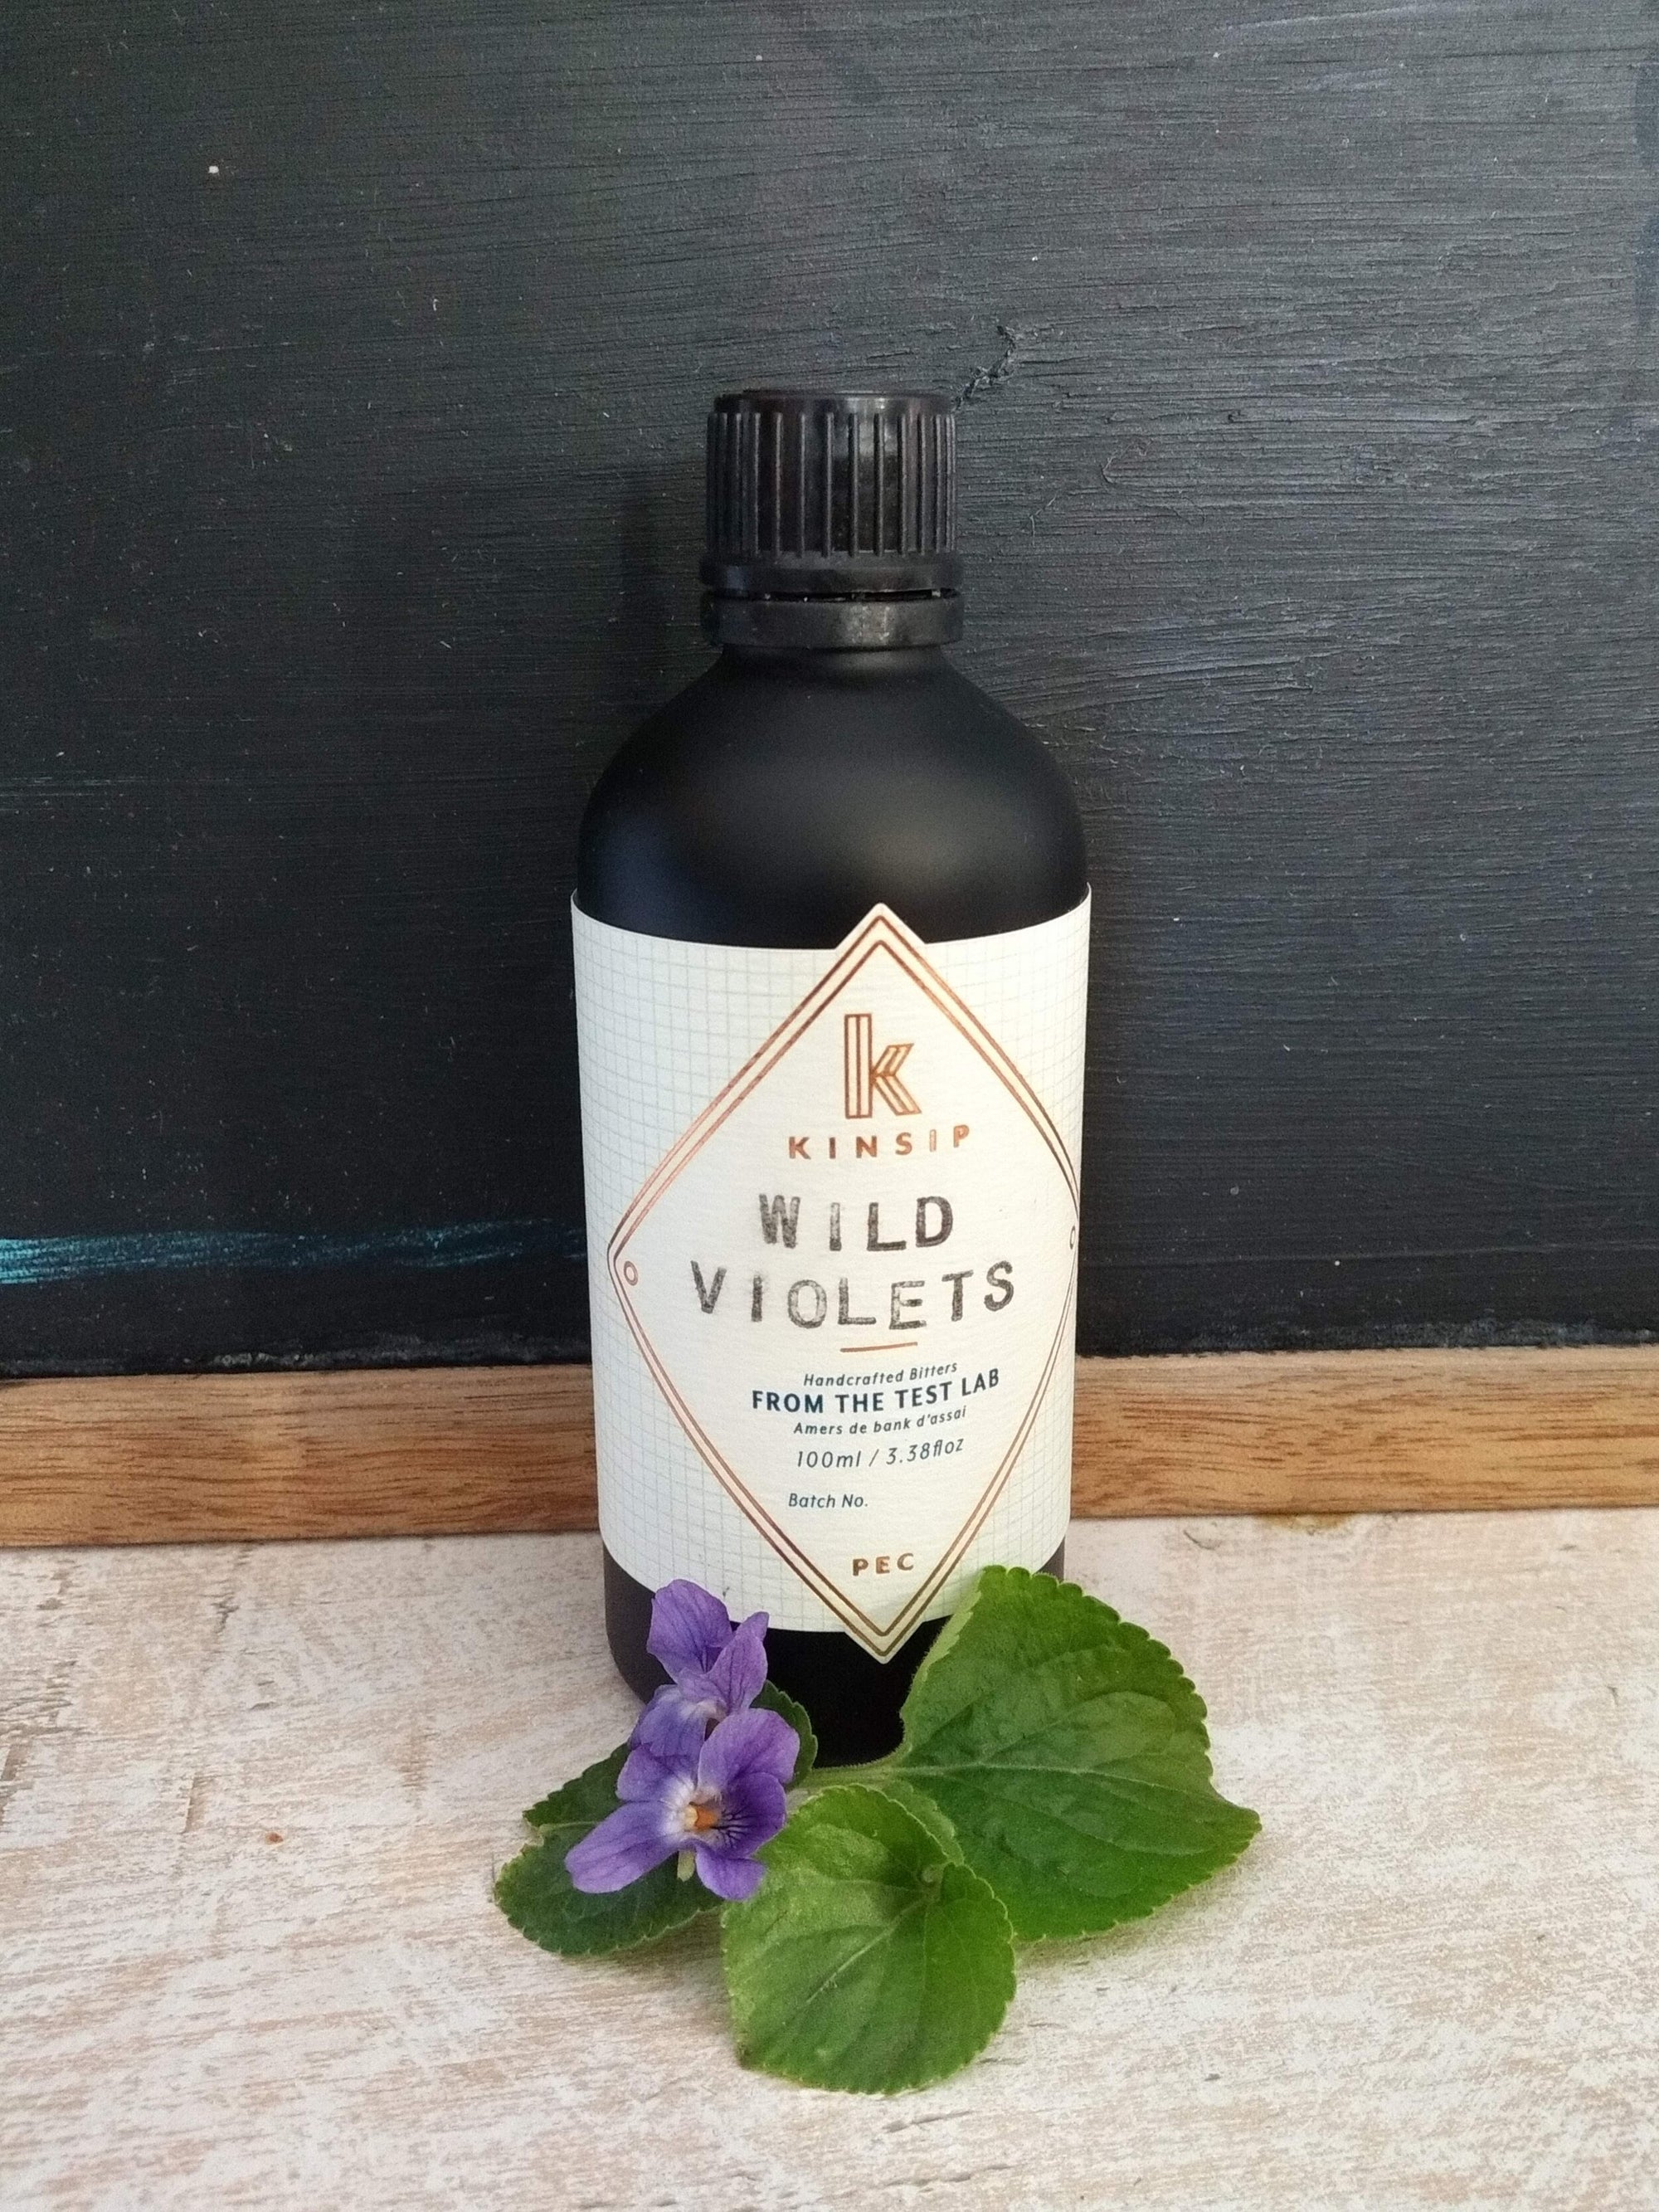 Wild Violets Handcrafted Bitters